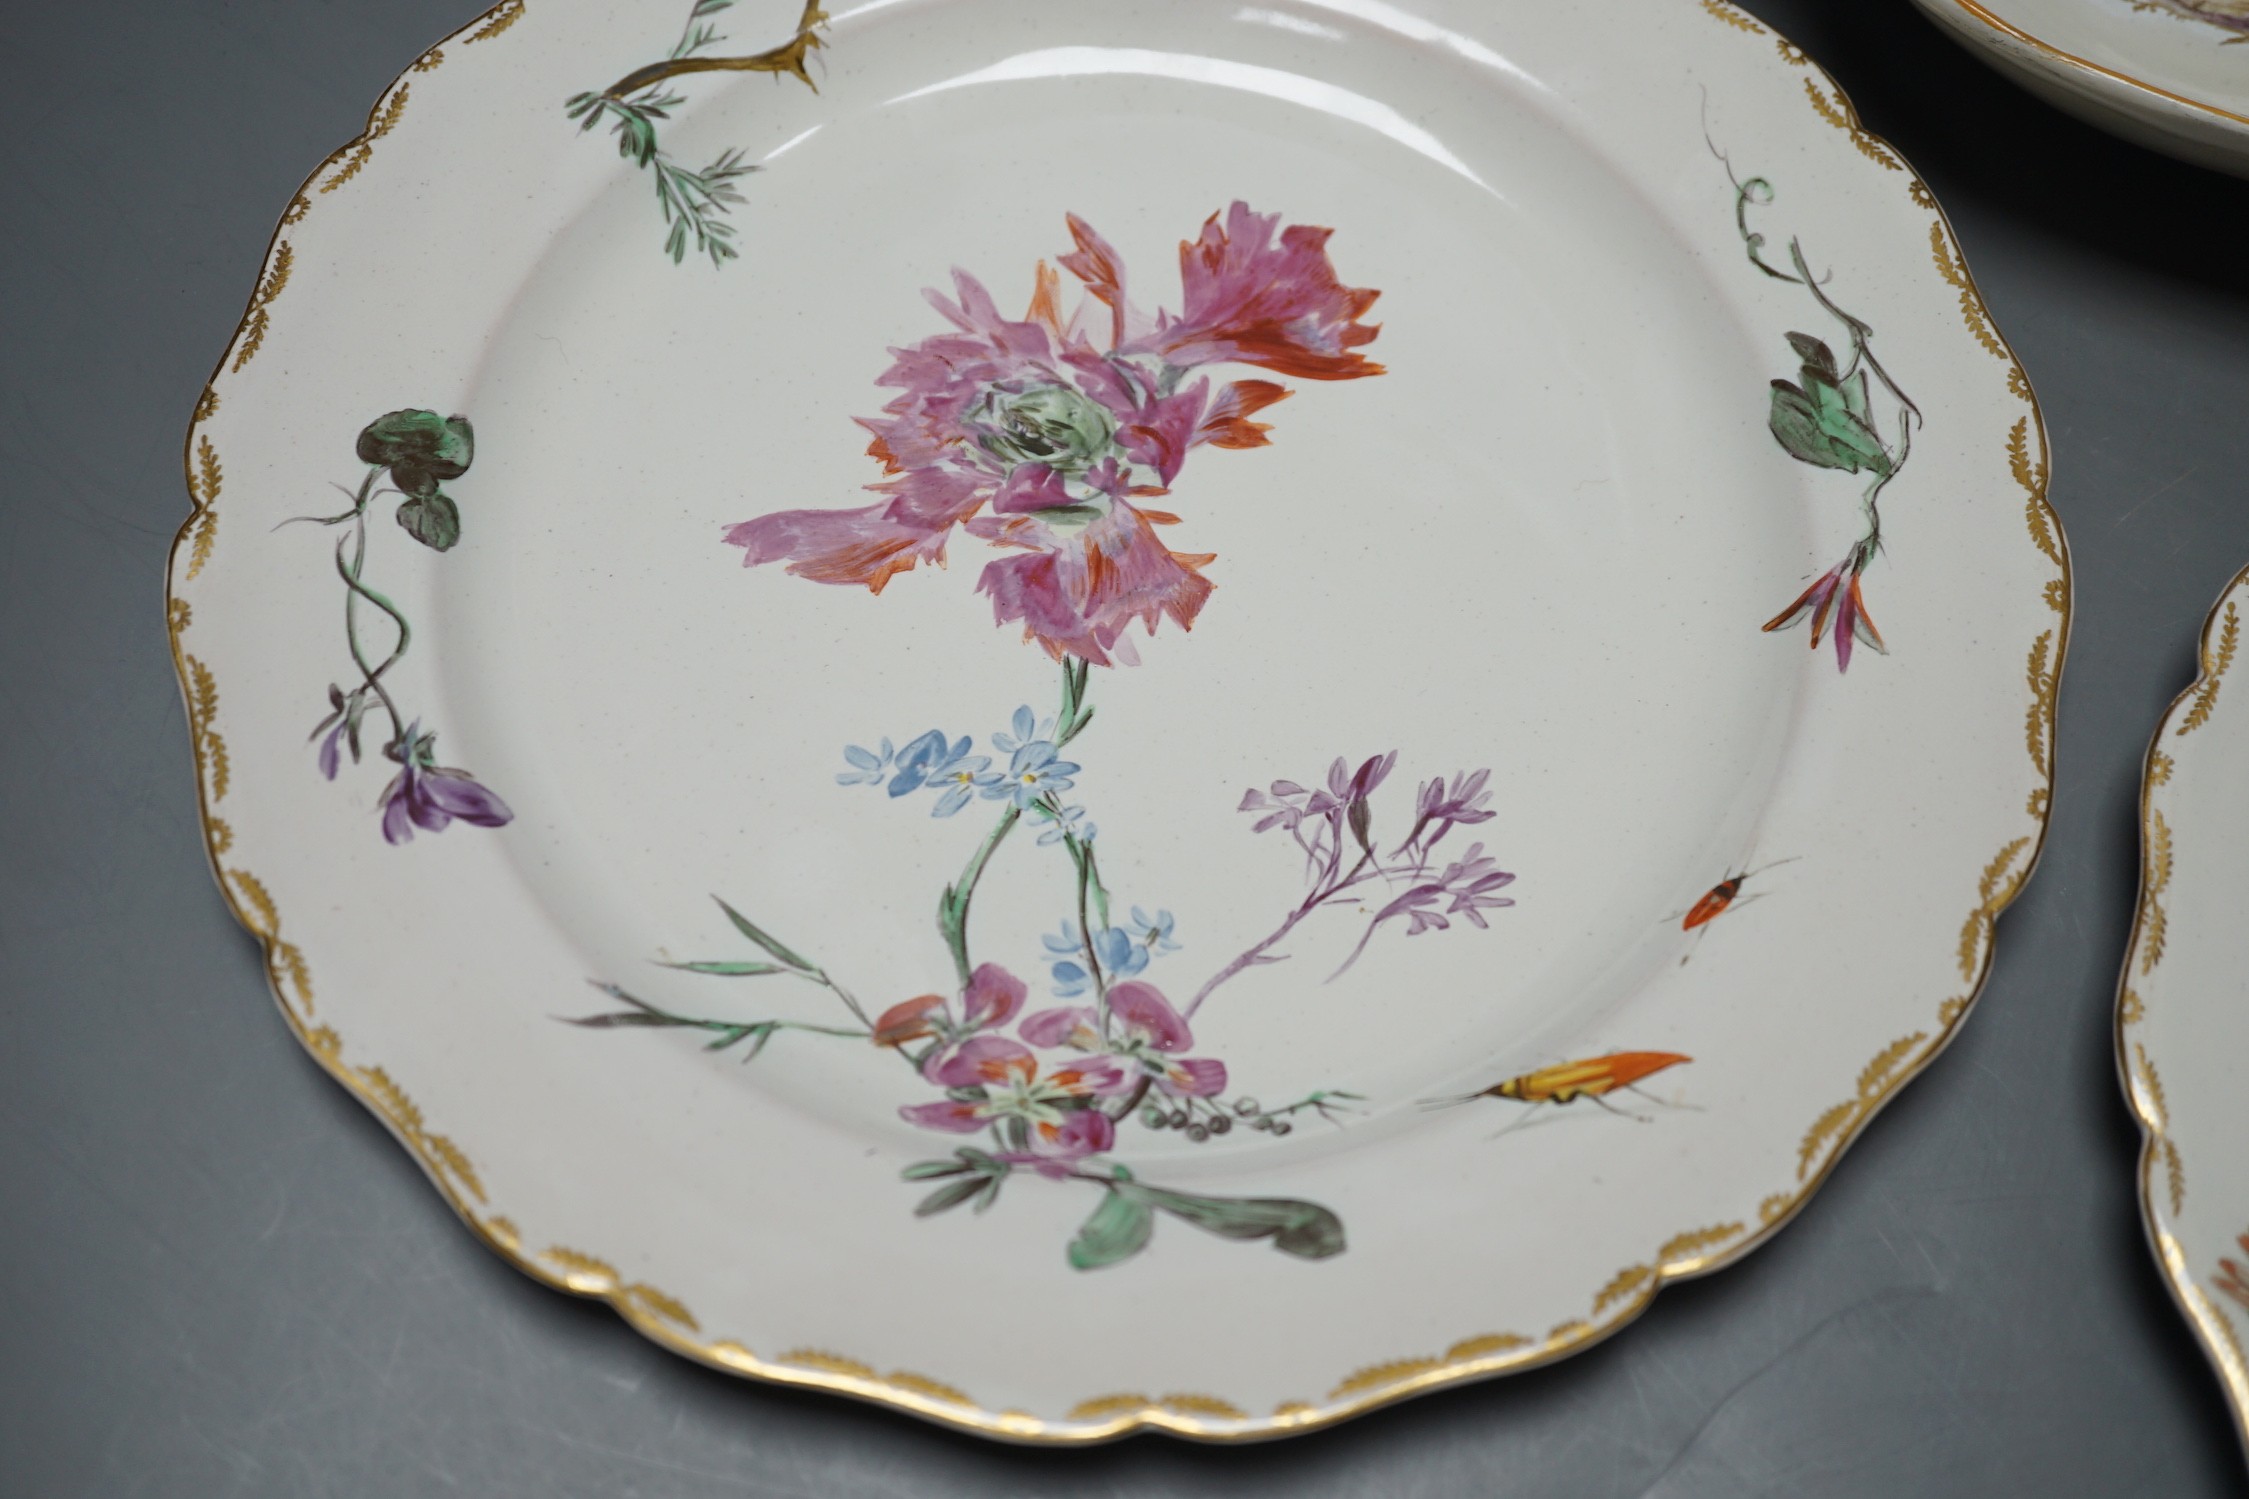 Three 19th century French faience dishes, largest 24cm diameter